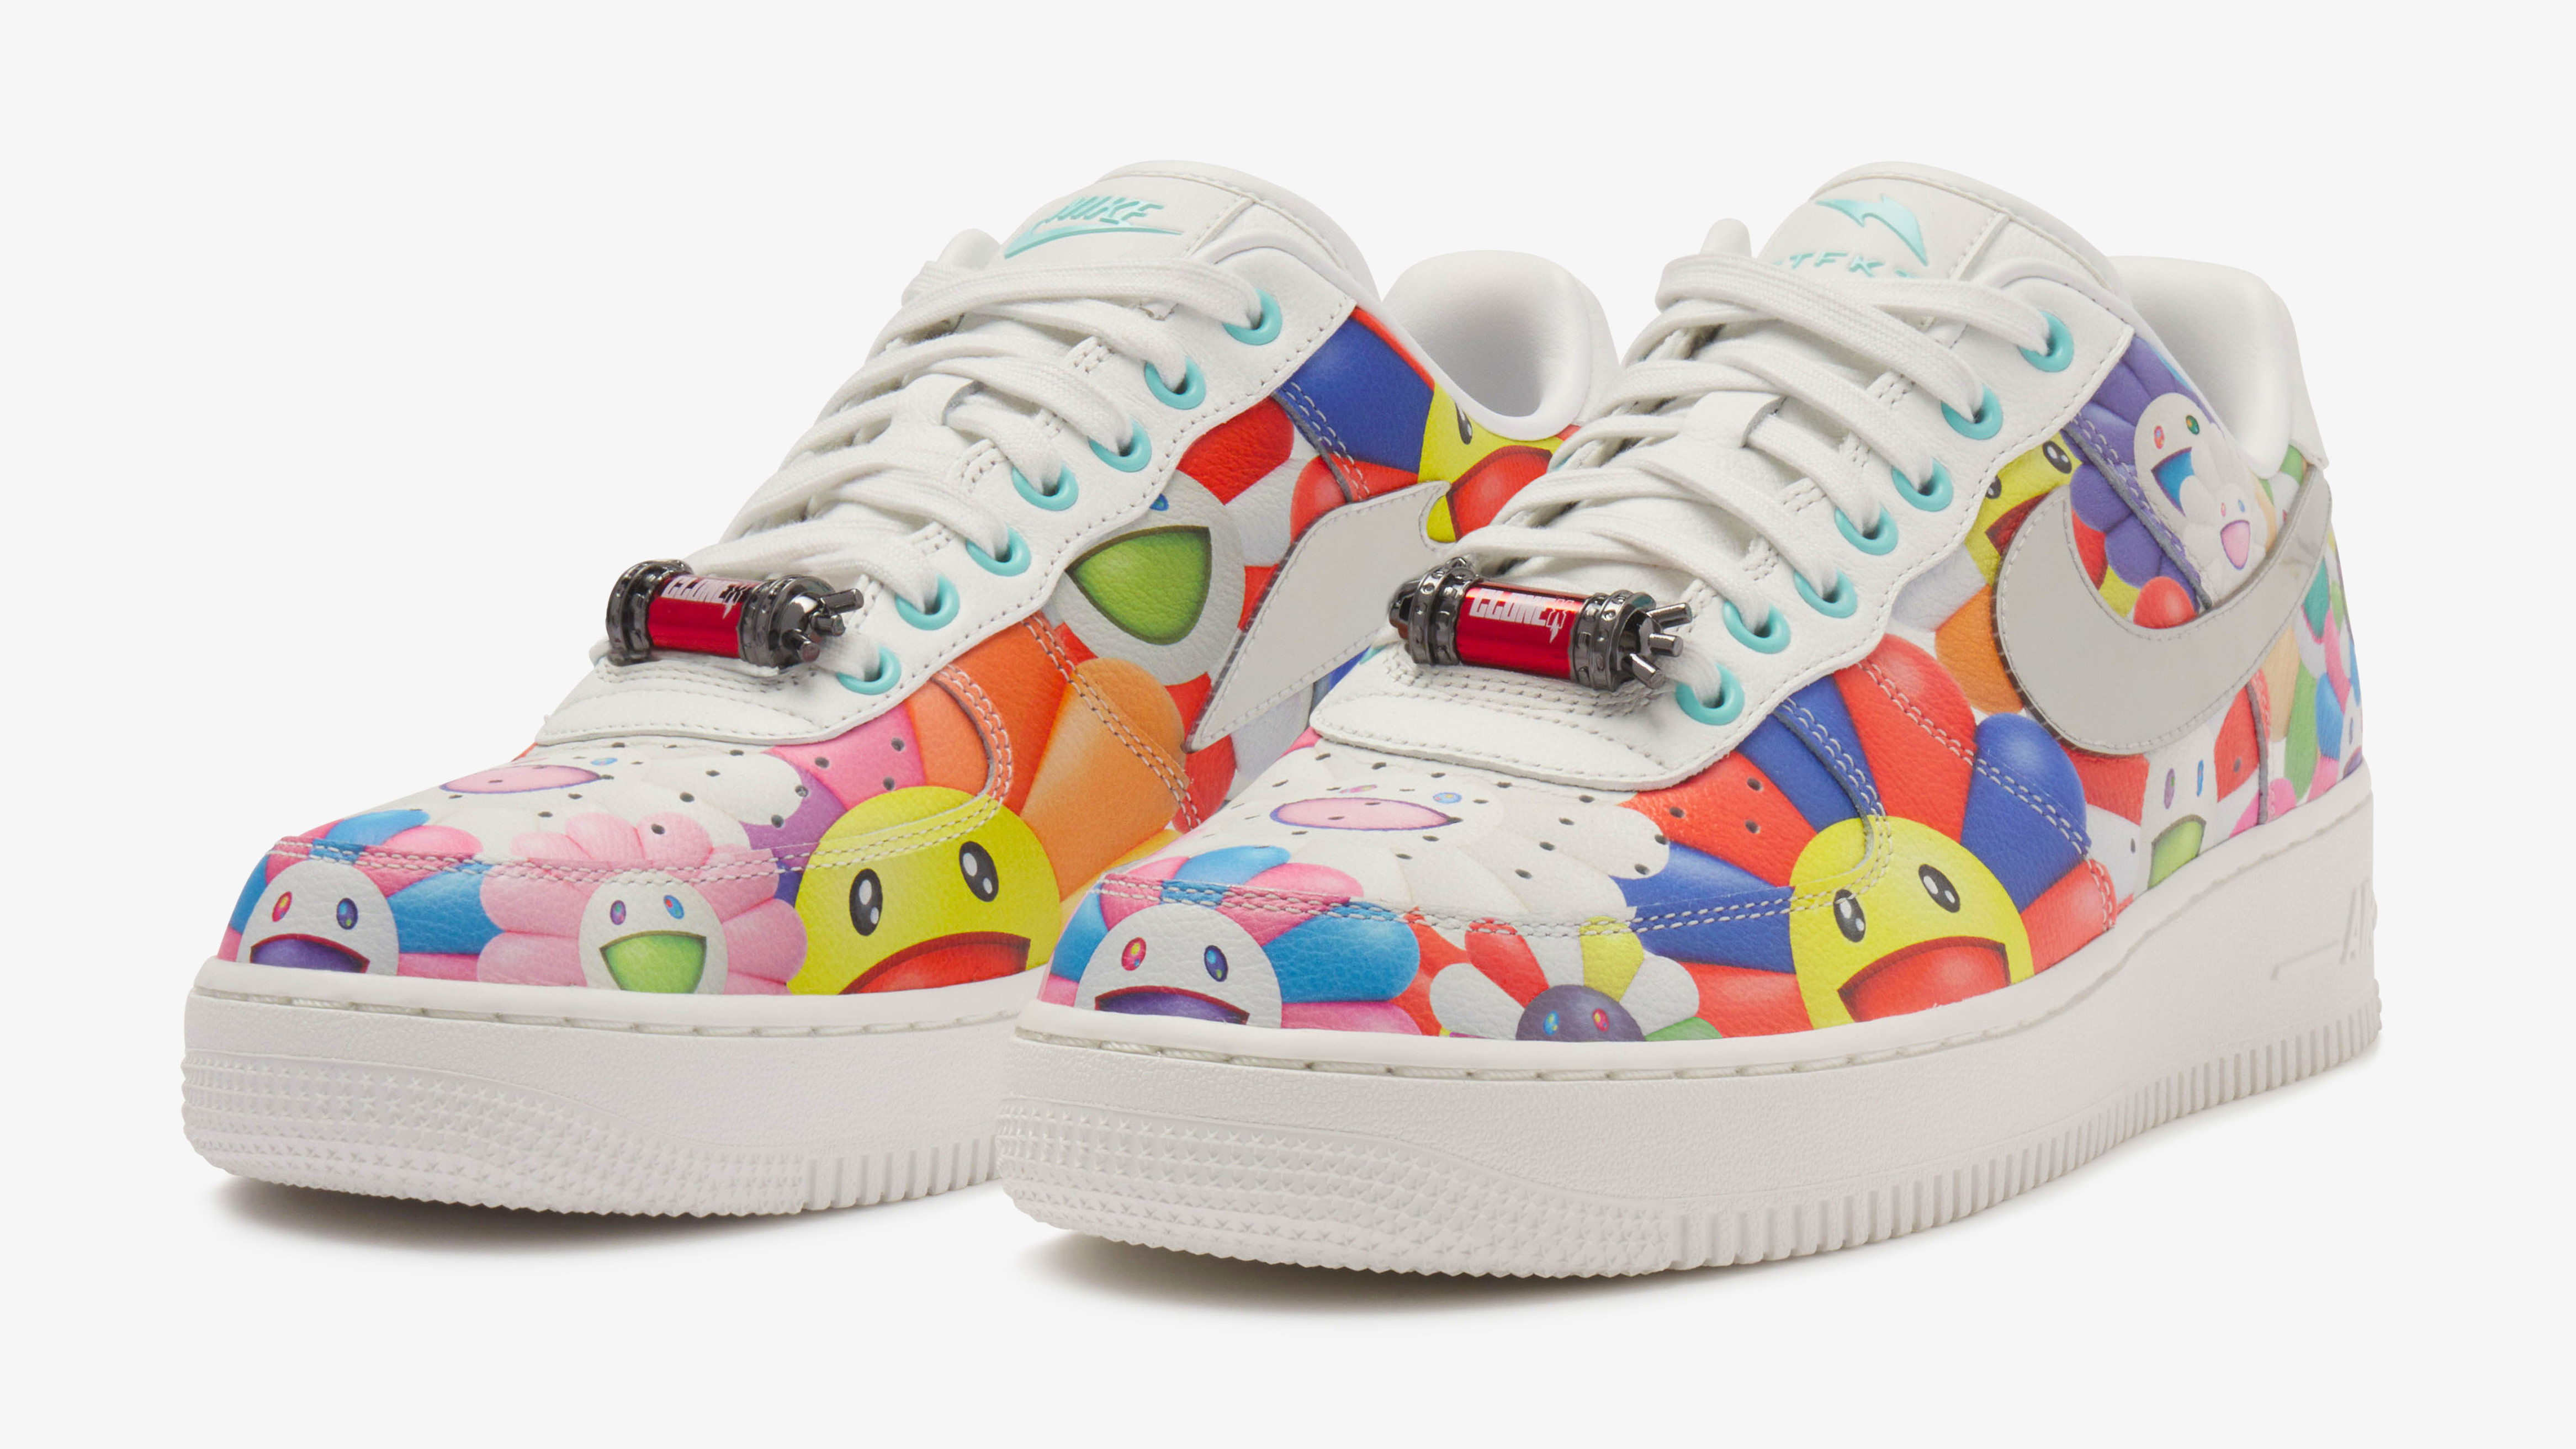 How to Buy Takashi Murakami's Nike Air Force 1 Collab | Complex